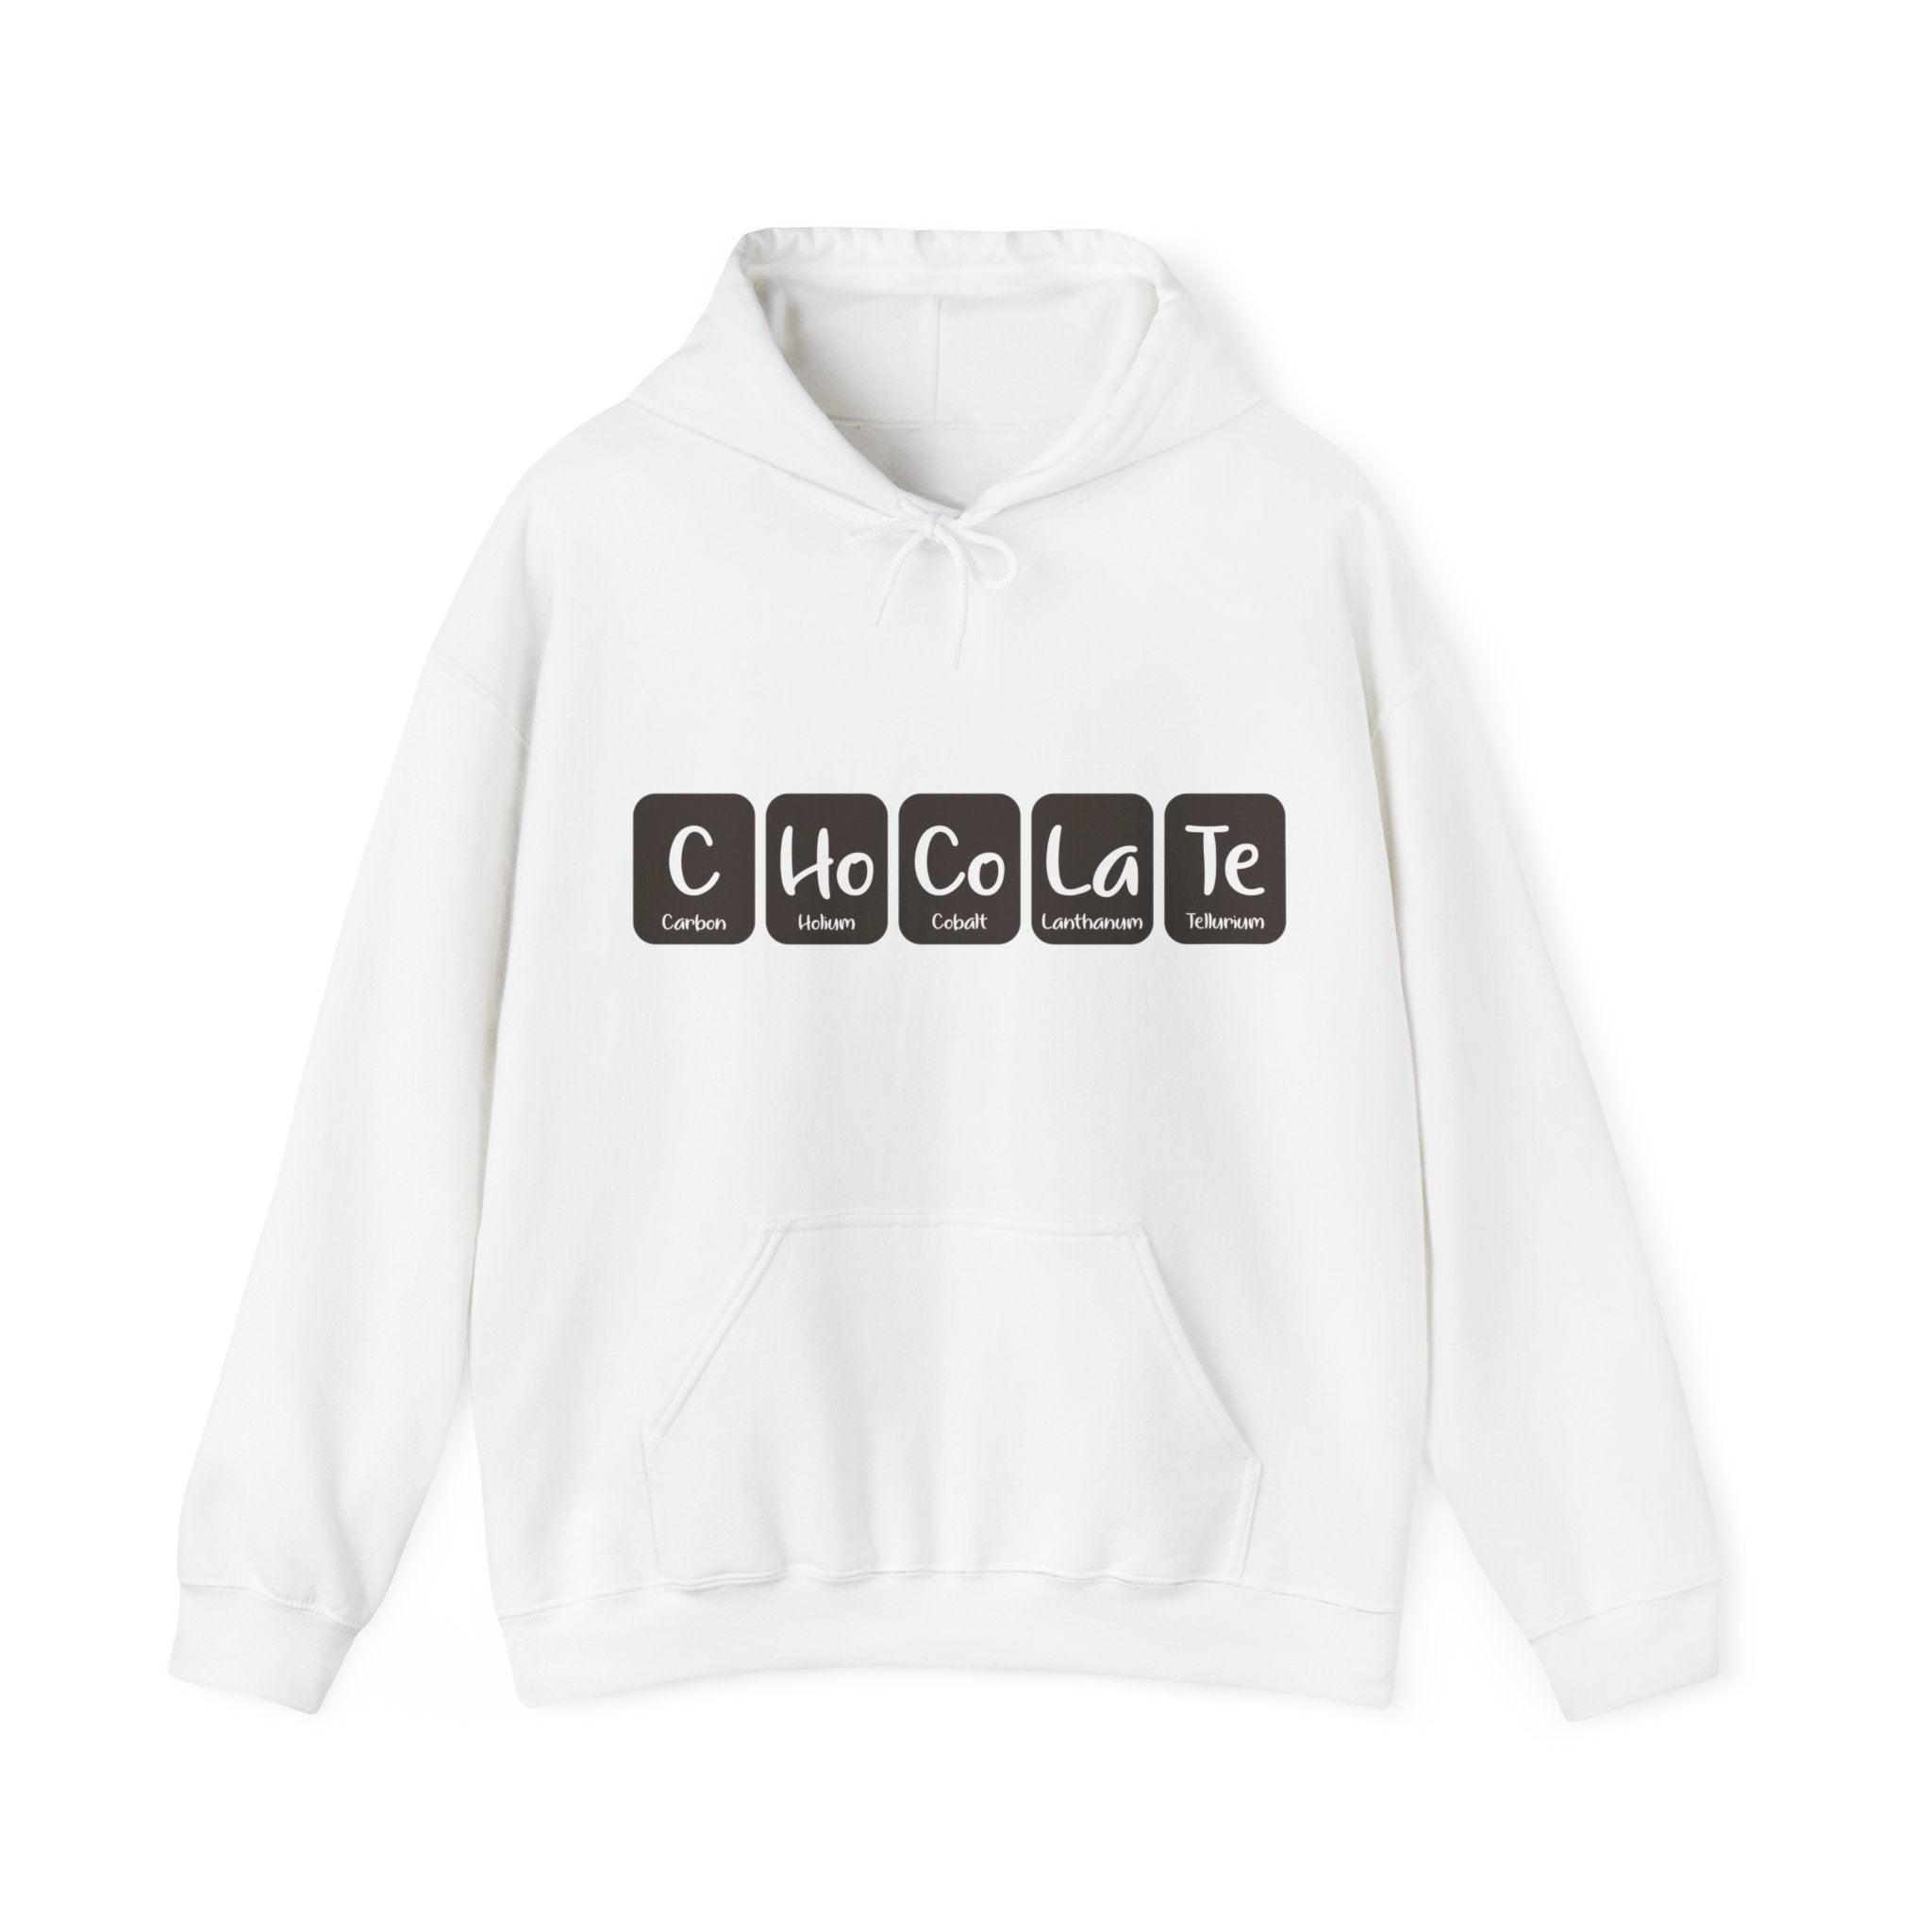 Fashion-forward C-Ho-Co-La-Te - Hooded Sweatshirt in white, featuring a chemistry-themed design on the chest using periodic table element symbols, complete with a convenient front pocket.